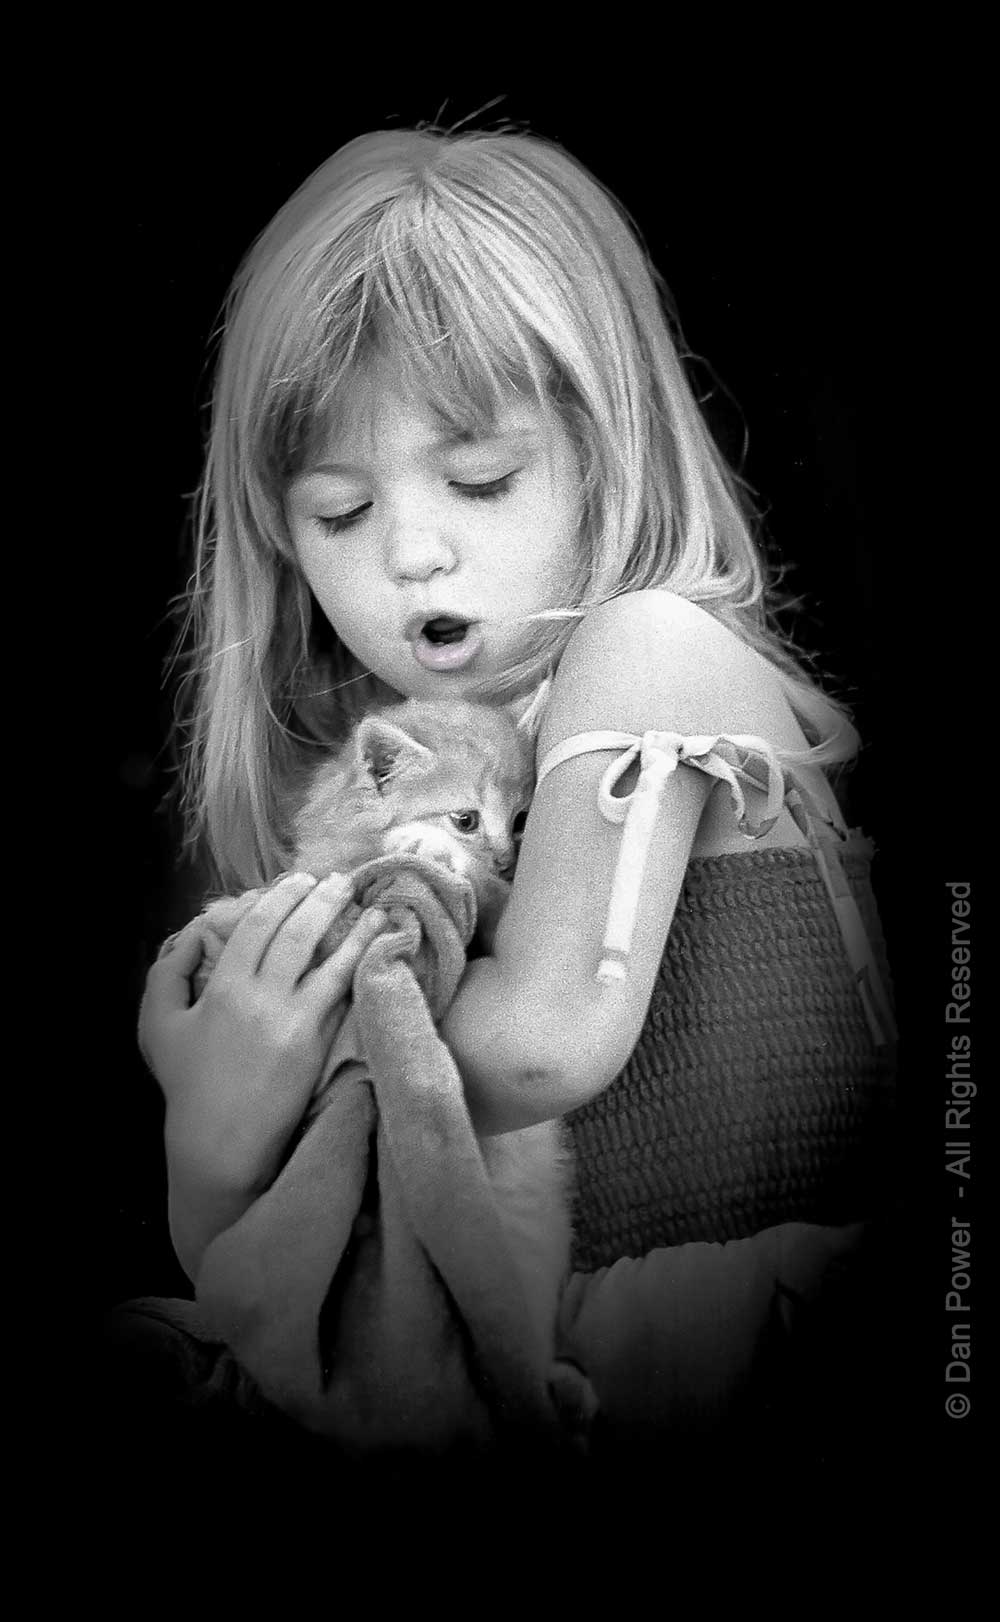 Young girl with kitten, black and white